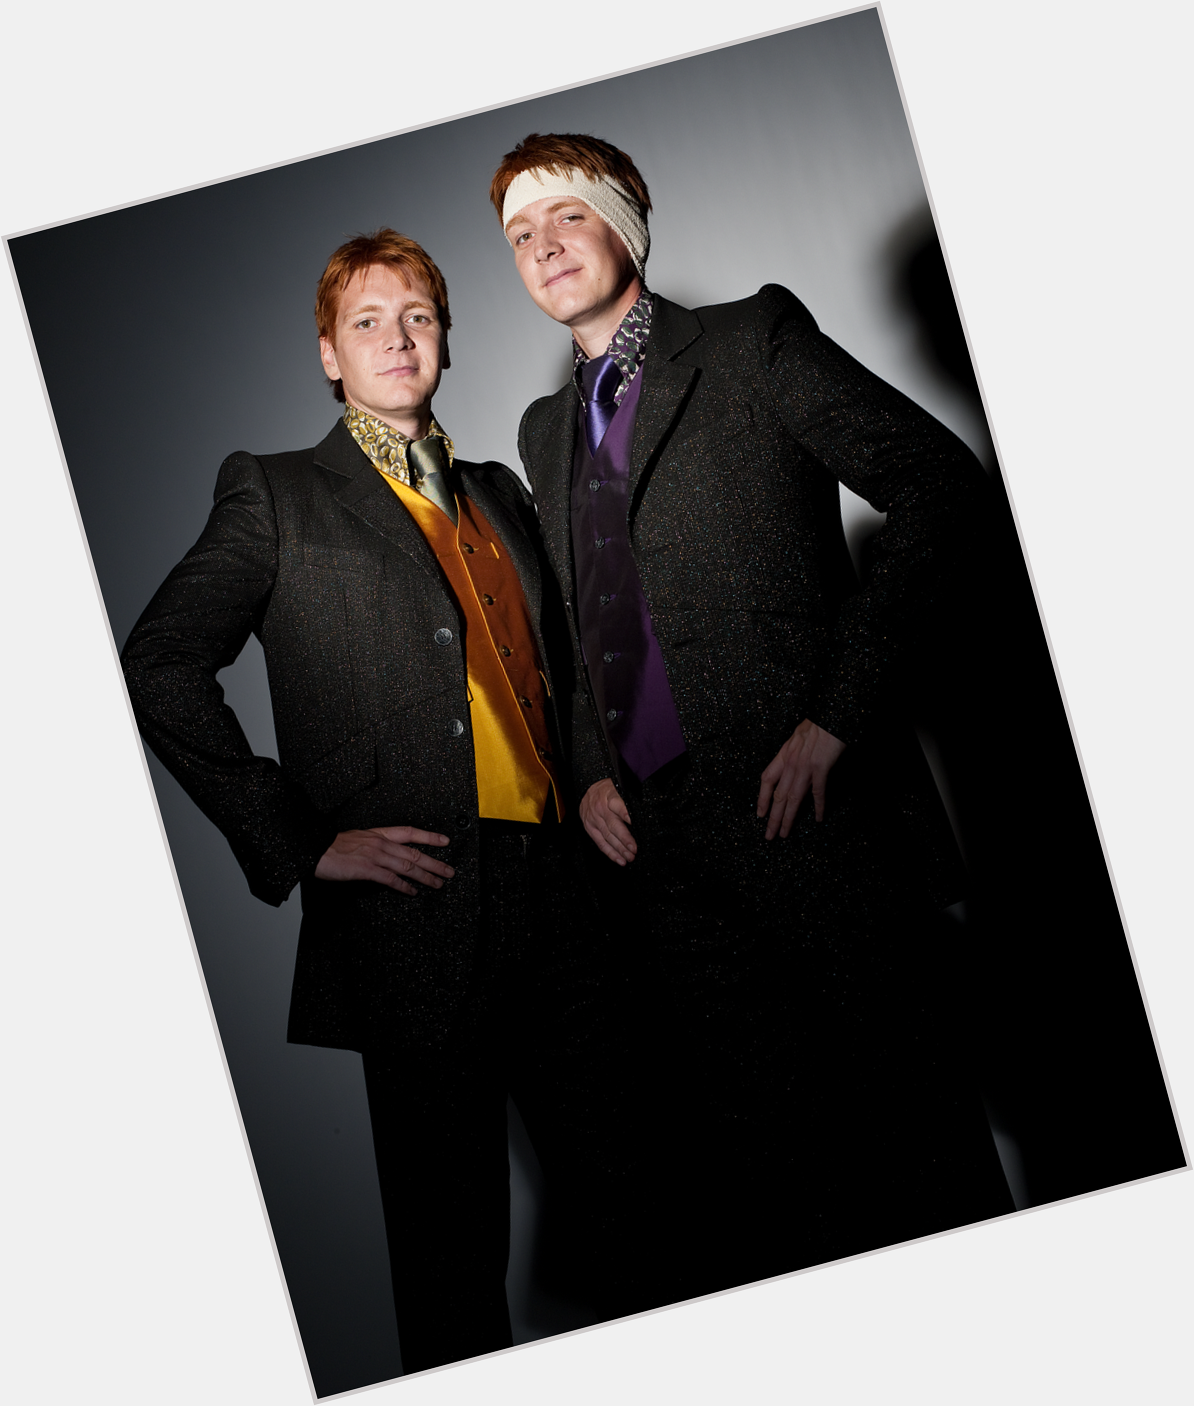 \" Happy birthday to James and Oliver Phelps, the original pranksters!   